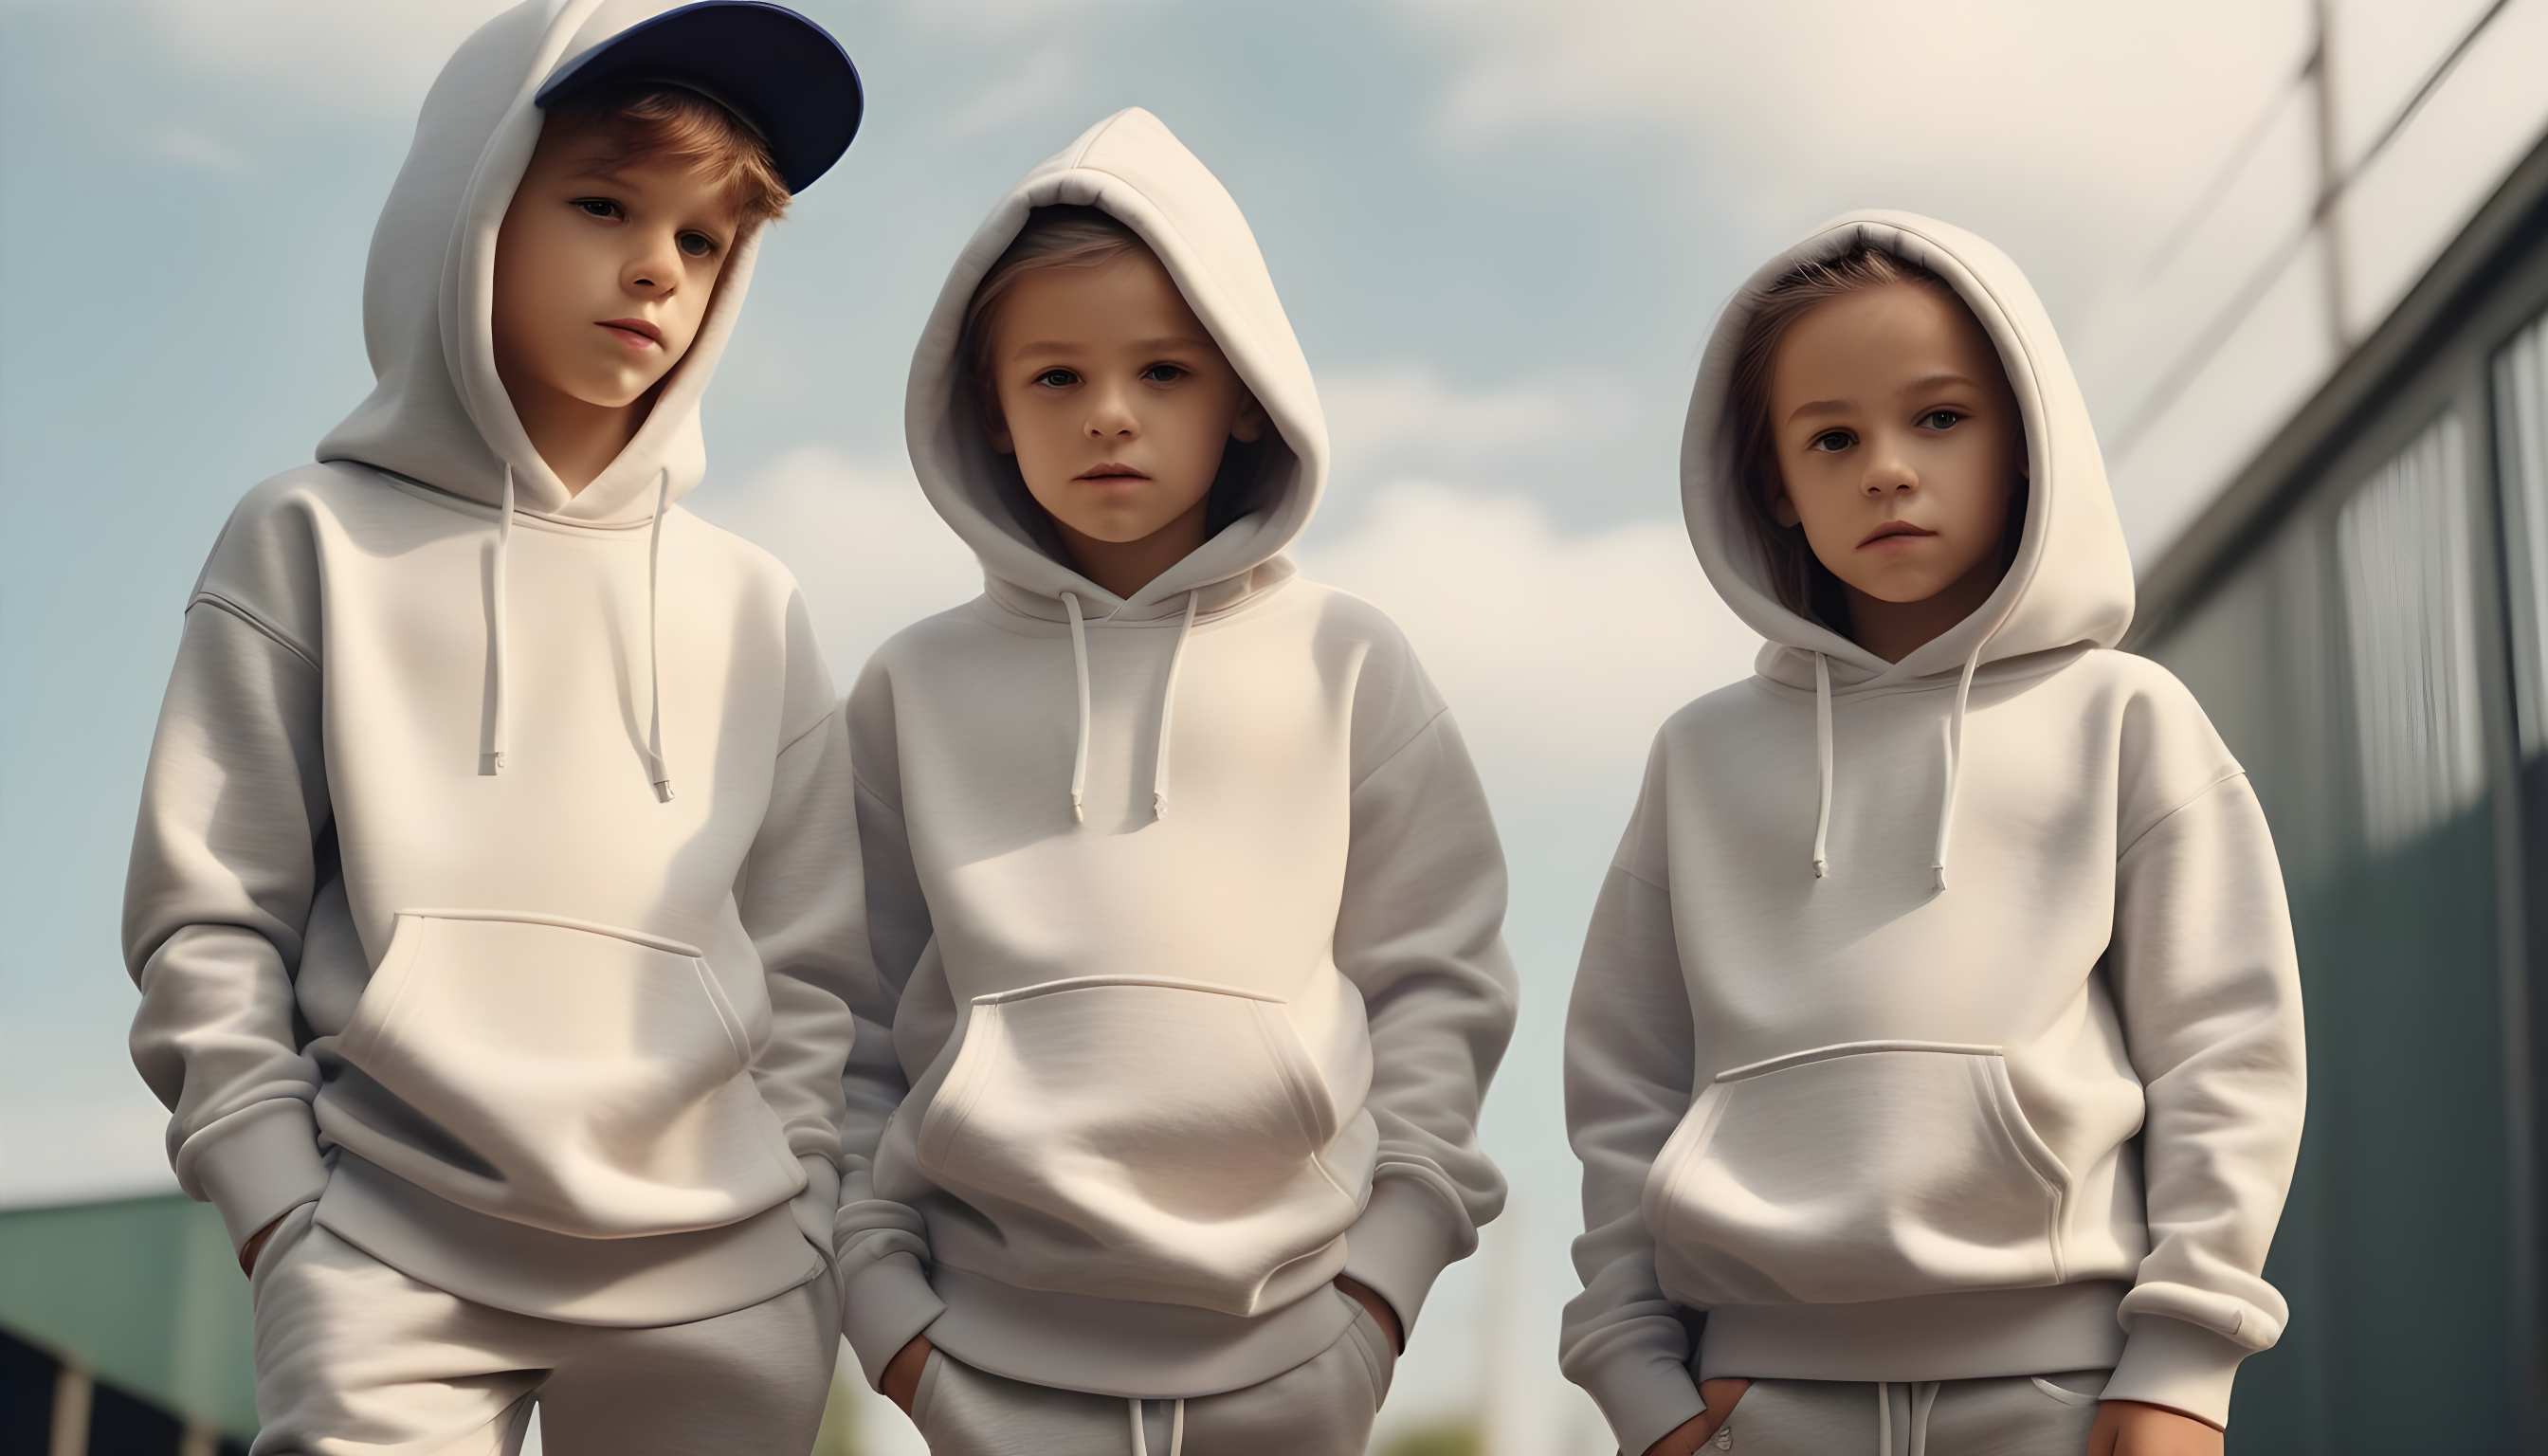 Kid Canvas - A Collection of Blank Apparel for the Next Generation